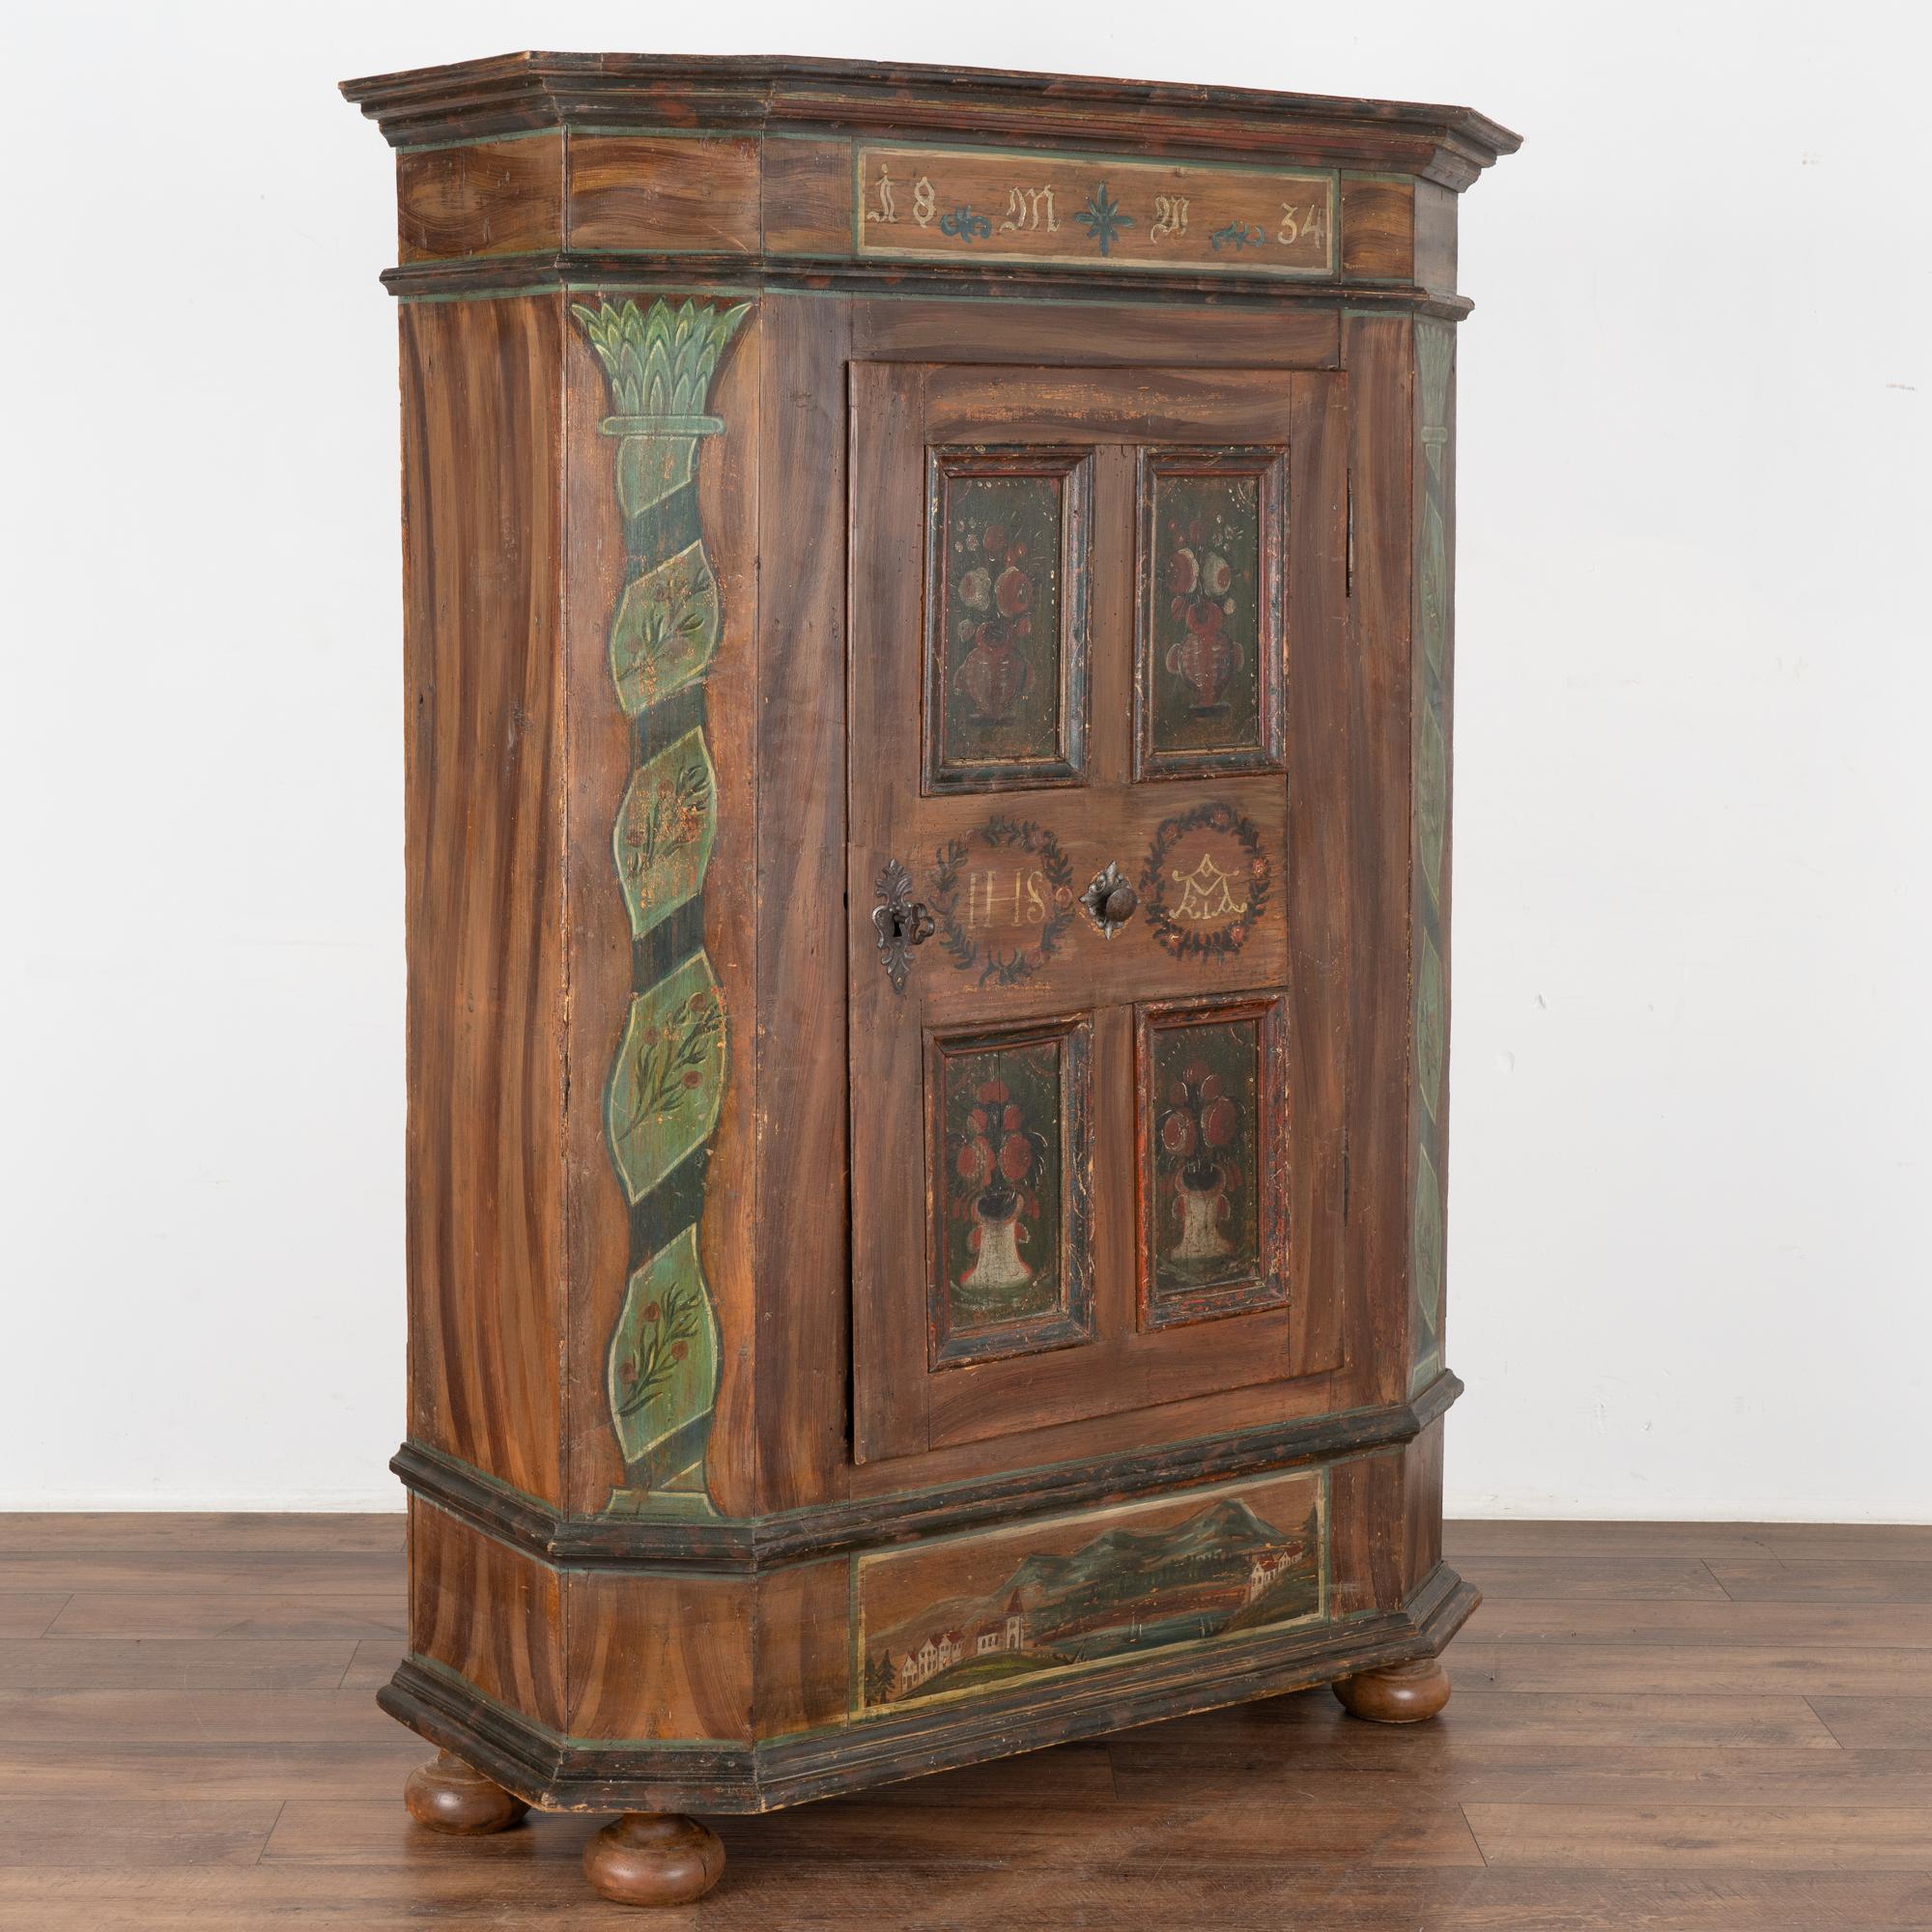 This lovely painted armoire still maintains the quality and details of the original hand-painted finish. The soft, gentle colors with delightful floral motifs are beautifully executed.
Notice the four panels of flowers in the door against a